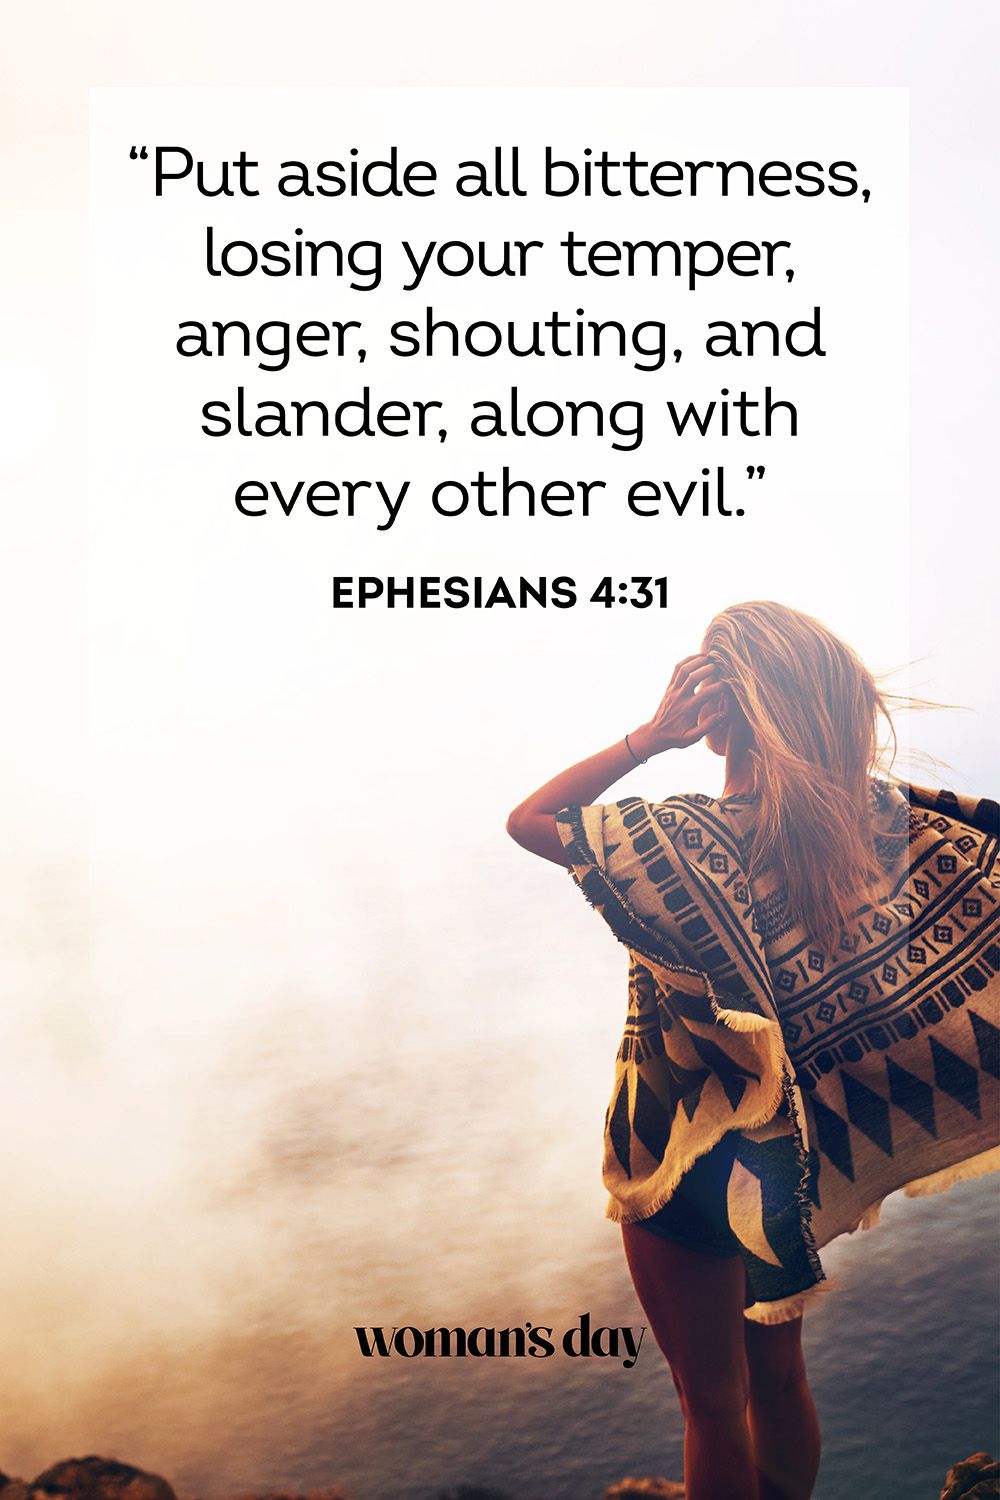 25 Bible Verses About Anger — What the Bible Says About Anger